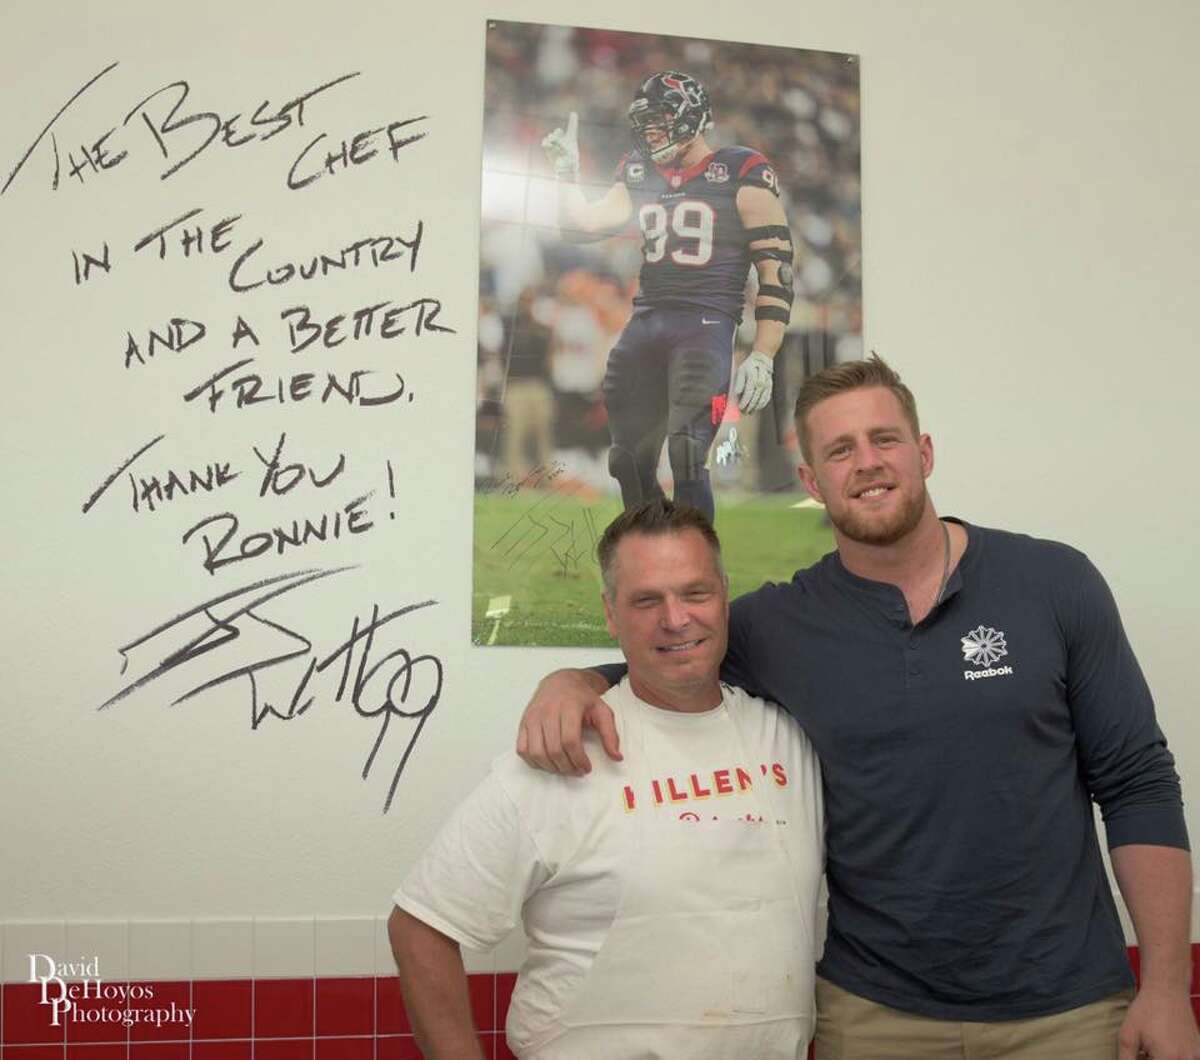 J.J. Watt The recently opened Killen's Burgers in Pearland includes a tribute to Texans star Watt called the #99 Burger. It consists of two 10-ounce patties with Wisconsin yellow cheddar cheese and Nueske's bacon. It's served with a side of Wisconsin cheese curds.